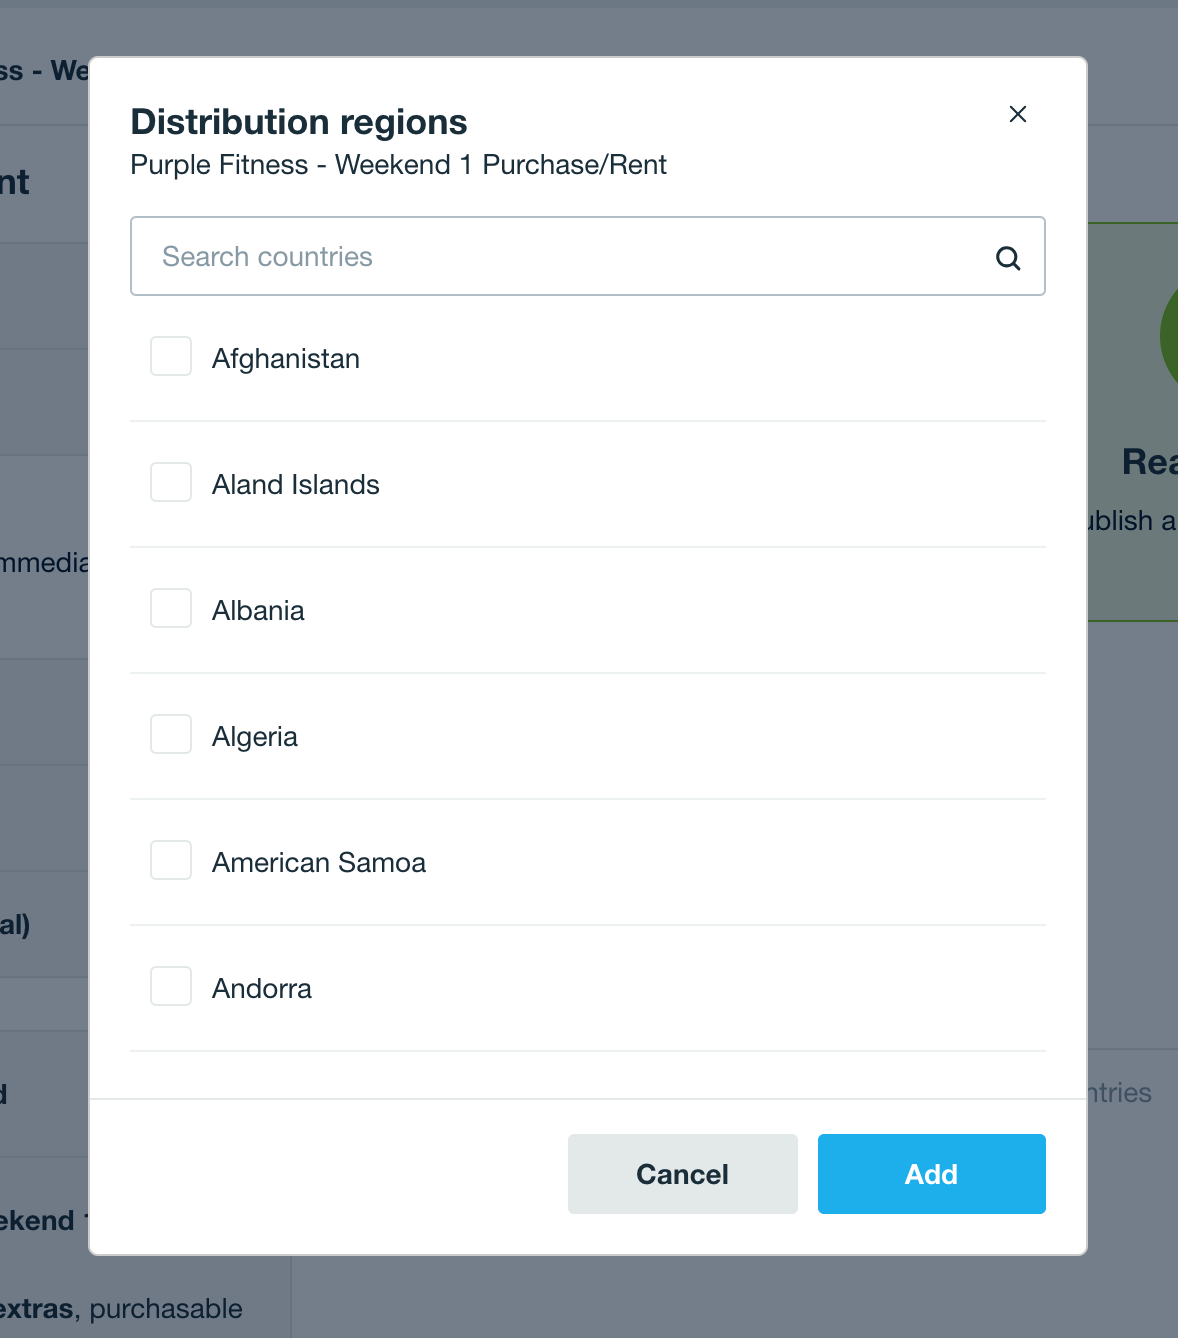 modal_window_with_distributions_regions_allowing_to_search_for_and_select_countries.png